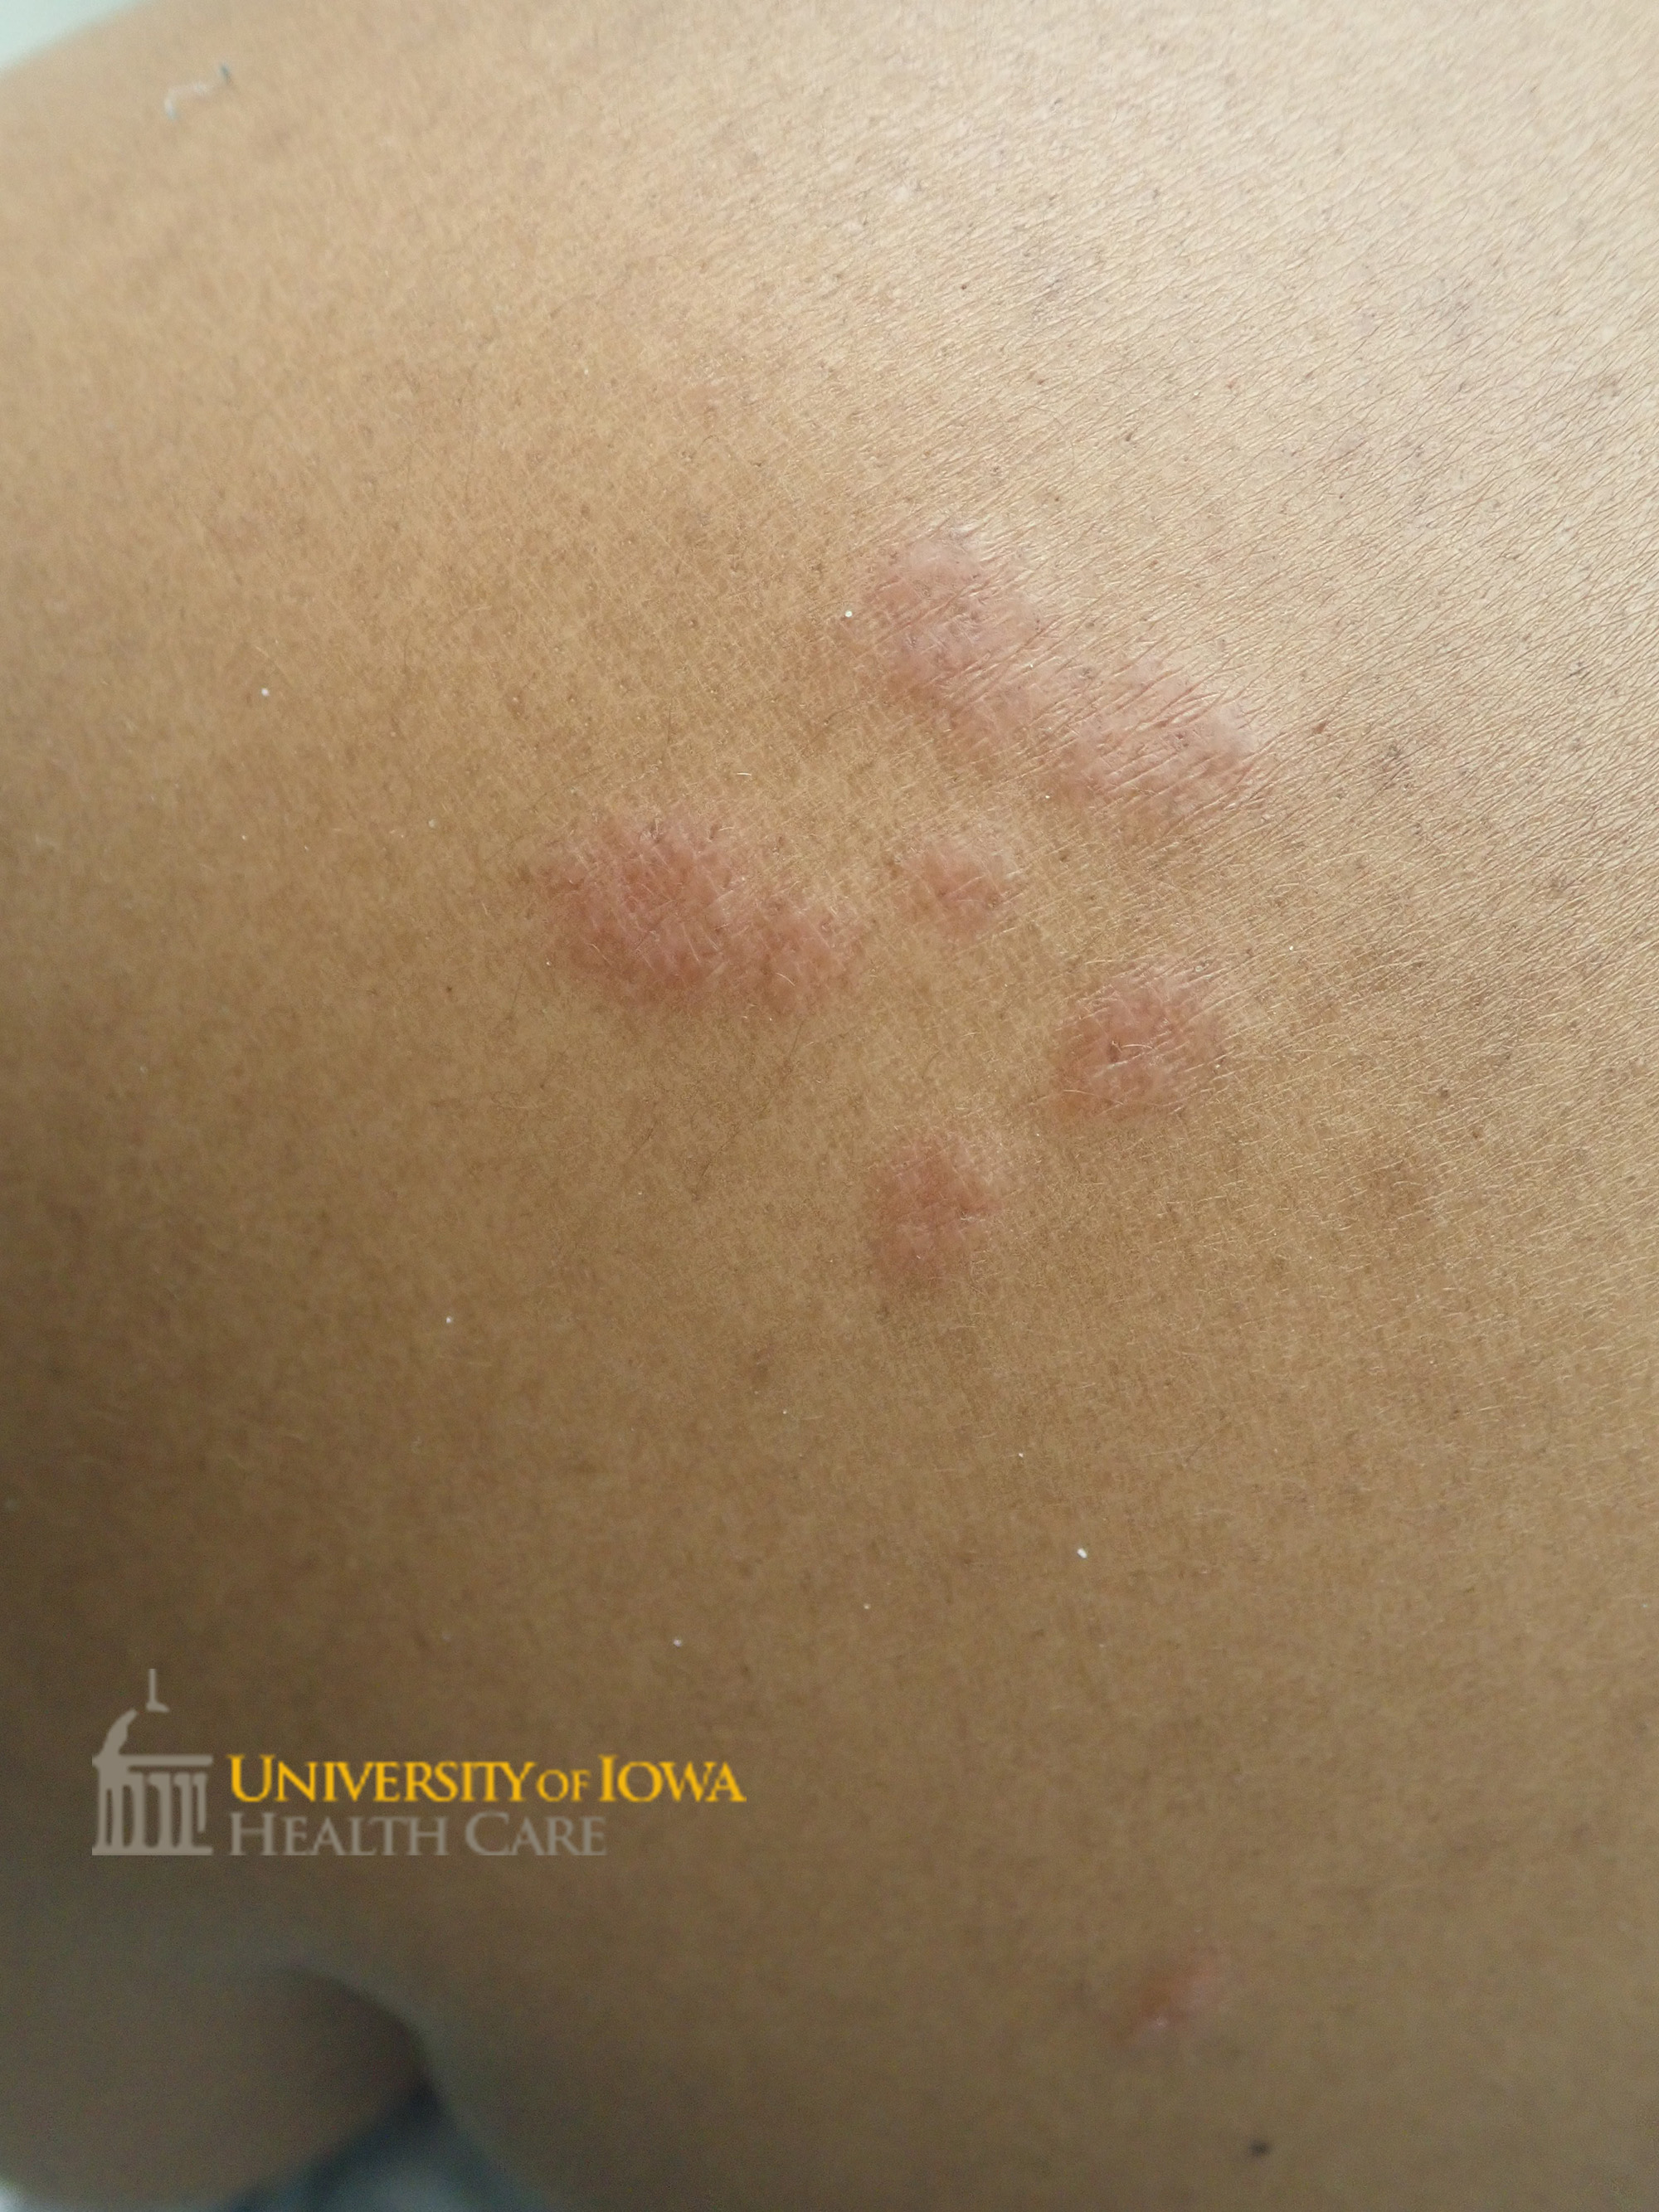 Shiny, red-brown clustered papules on the back. (click images for higher resolution).